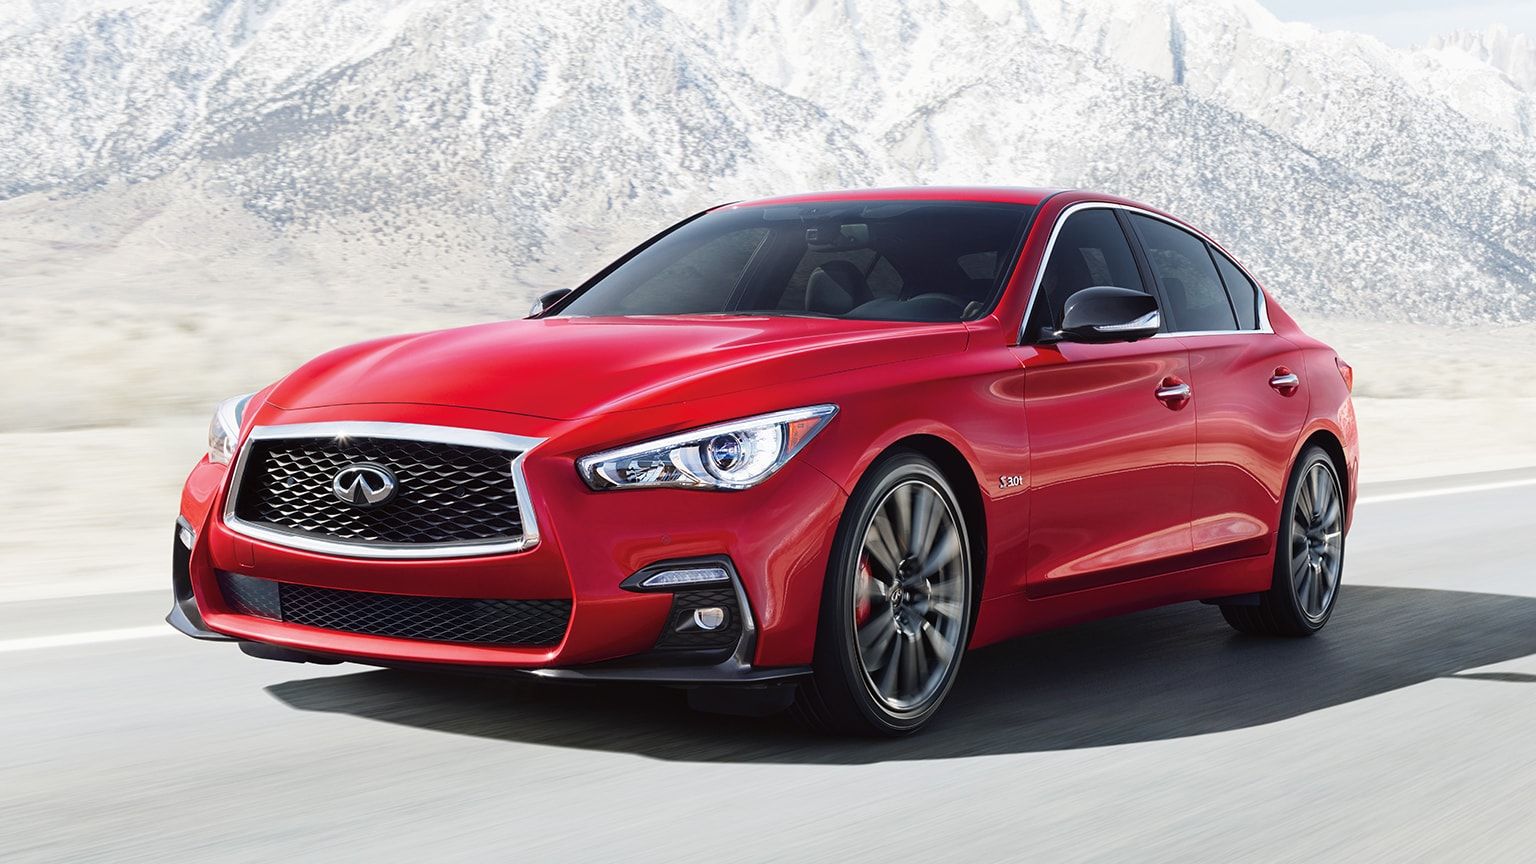 2018 Infiniti Q60 Prices, Reviews, and Photos - MotorTrend